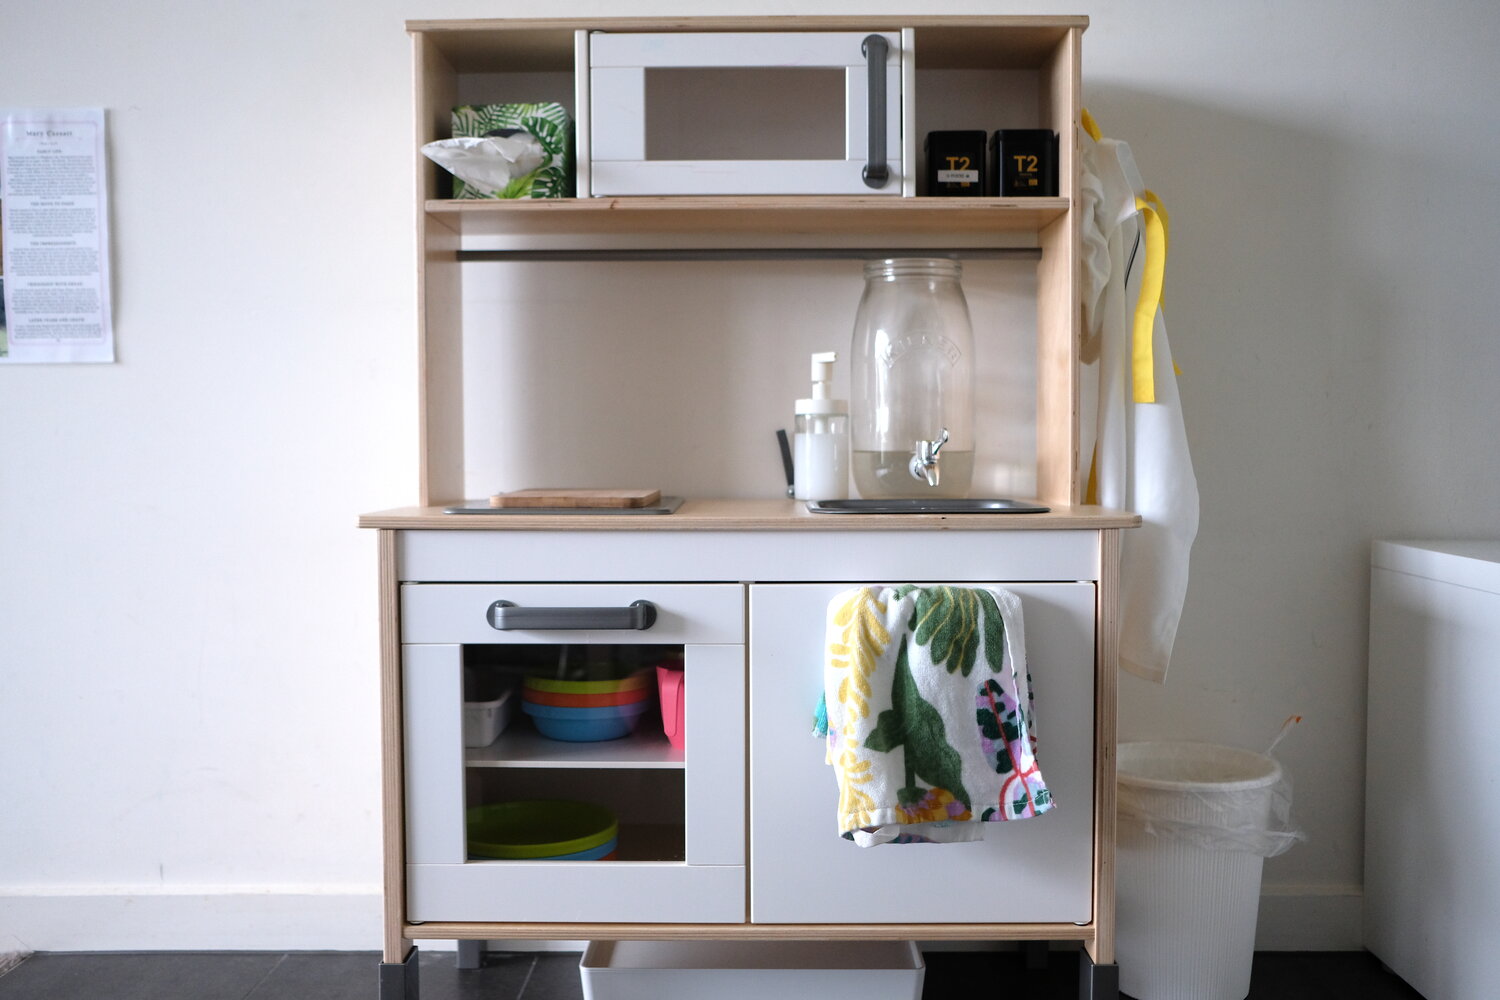 A Functional Montessori-Inspired Kitchen for Toddlers